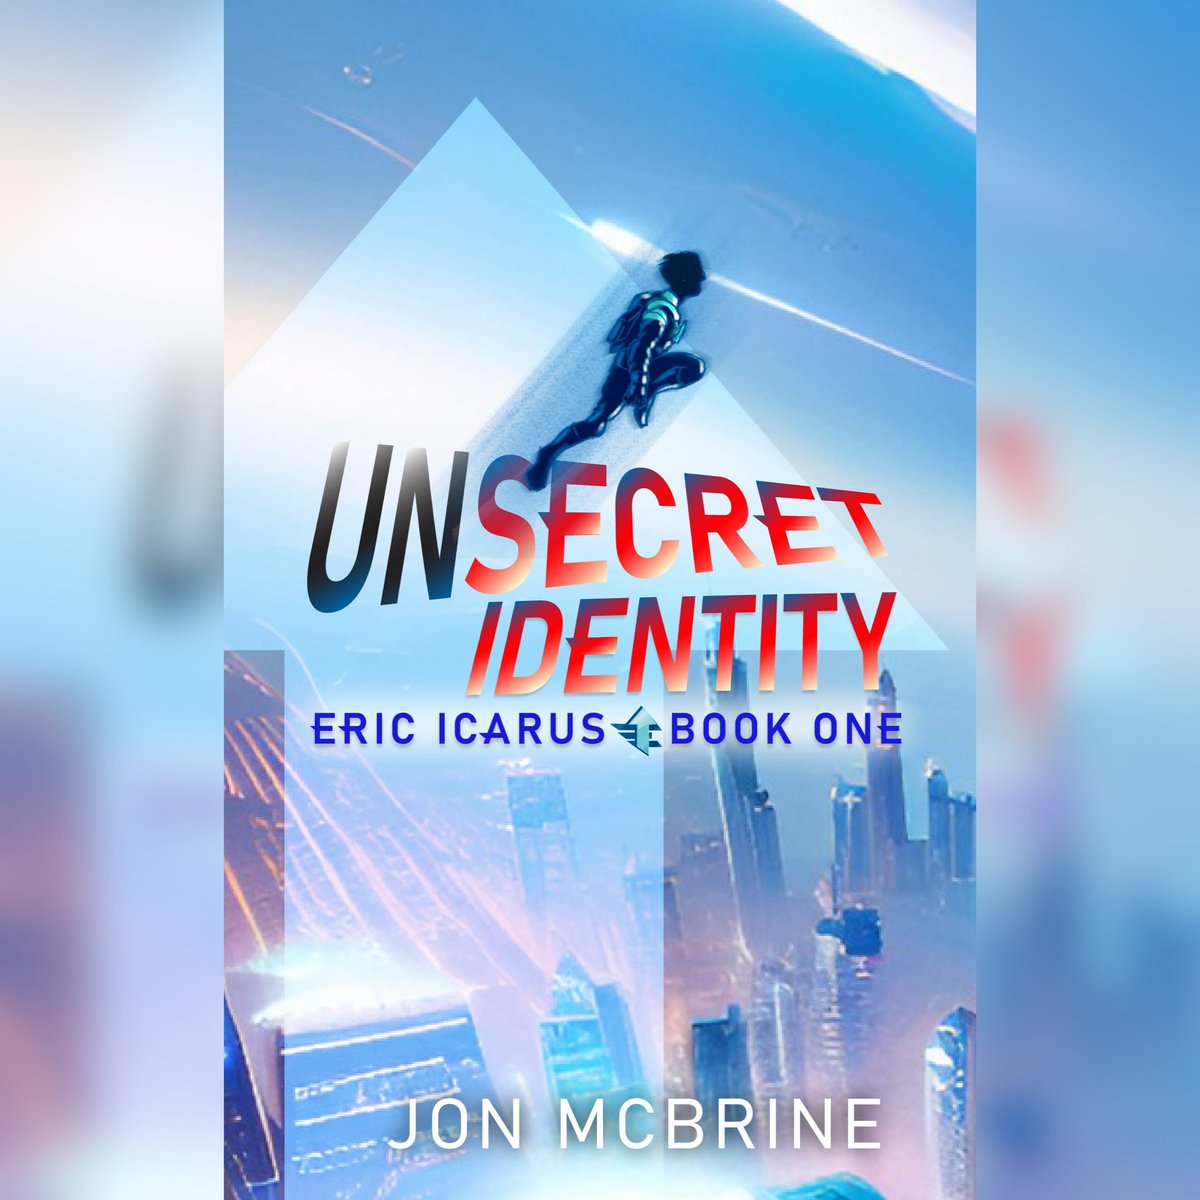 Here is an unused cover concept created during the development of Unsecret Identity #coverart #conceptart #book #bookart #illustration #digital #novel #ebook #yafiction #superhero #fly #secret #super #flyer #design #ArtistOnX #bookcover #cover #readers